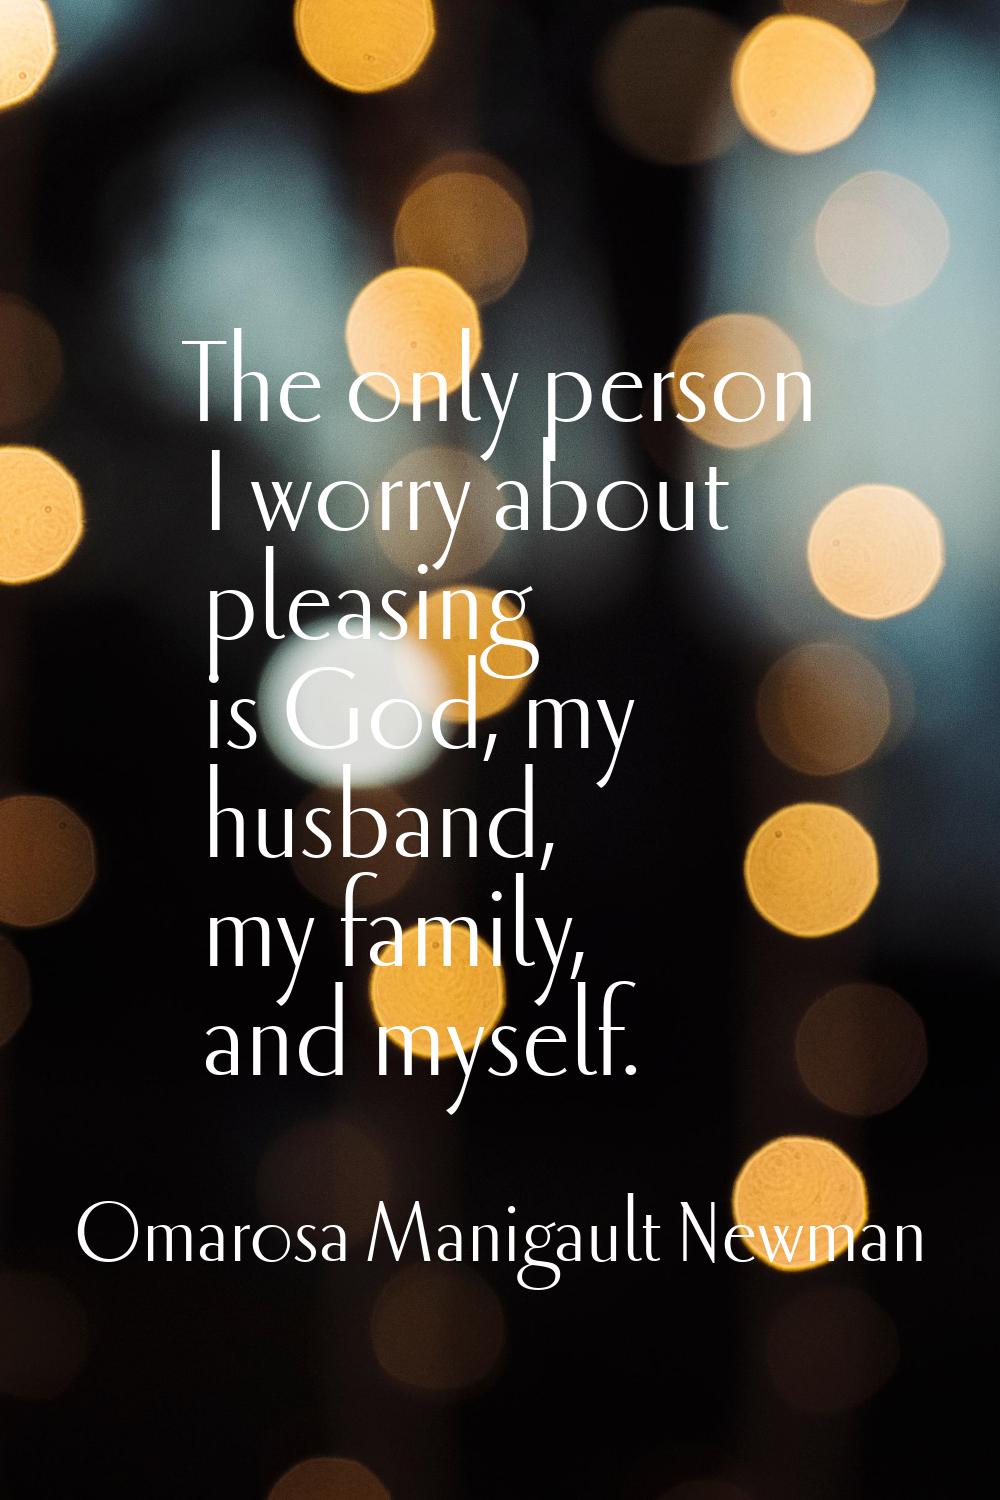 The only person I worry about pleasing is God, my husband, my family, and myself.